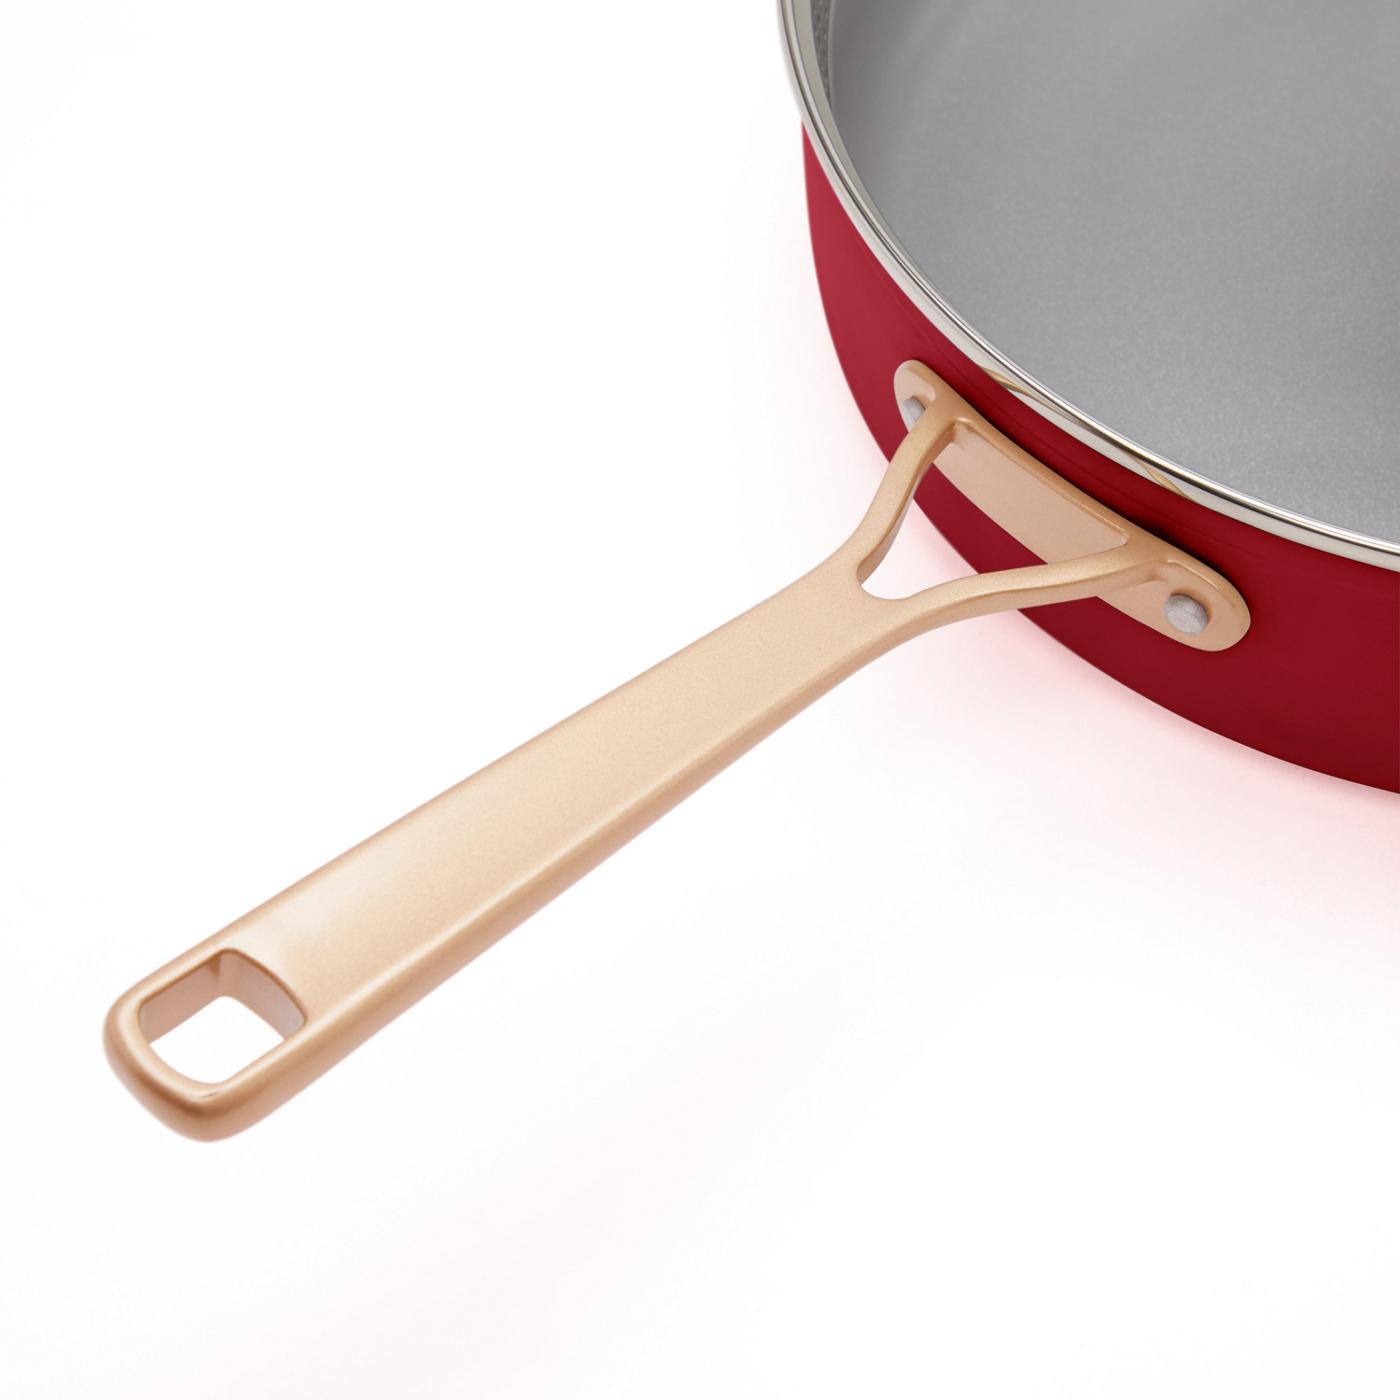 Kitchen & Table by H-E-B Non-Stick Sauté Pan with Strainer Lid - Bordeaux Red; image 5 of 7